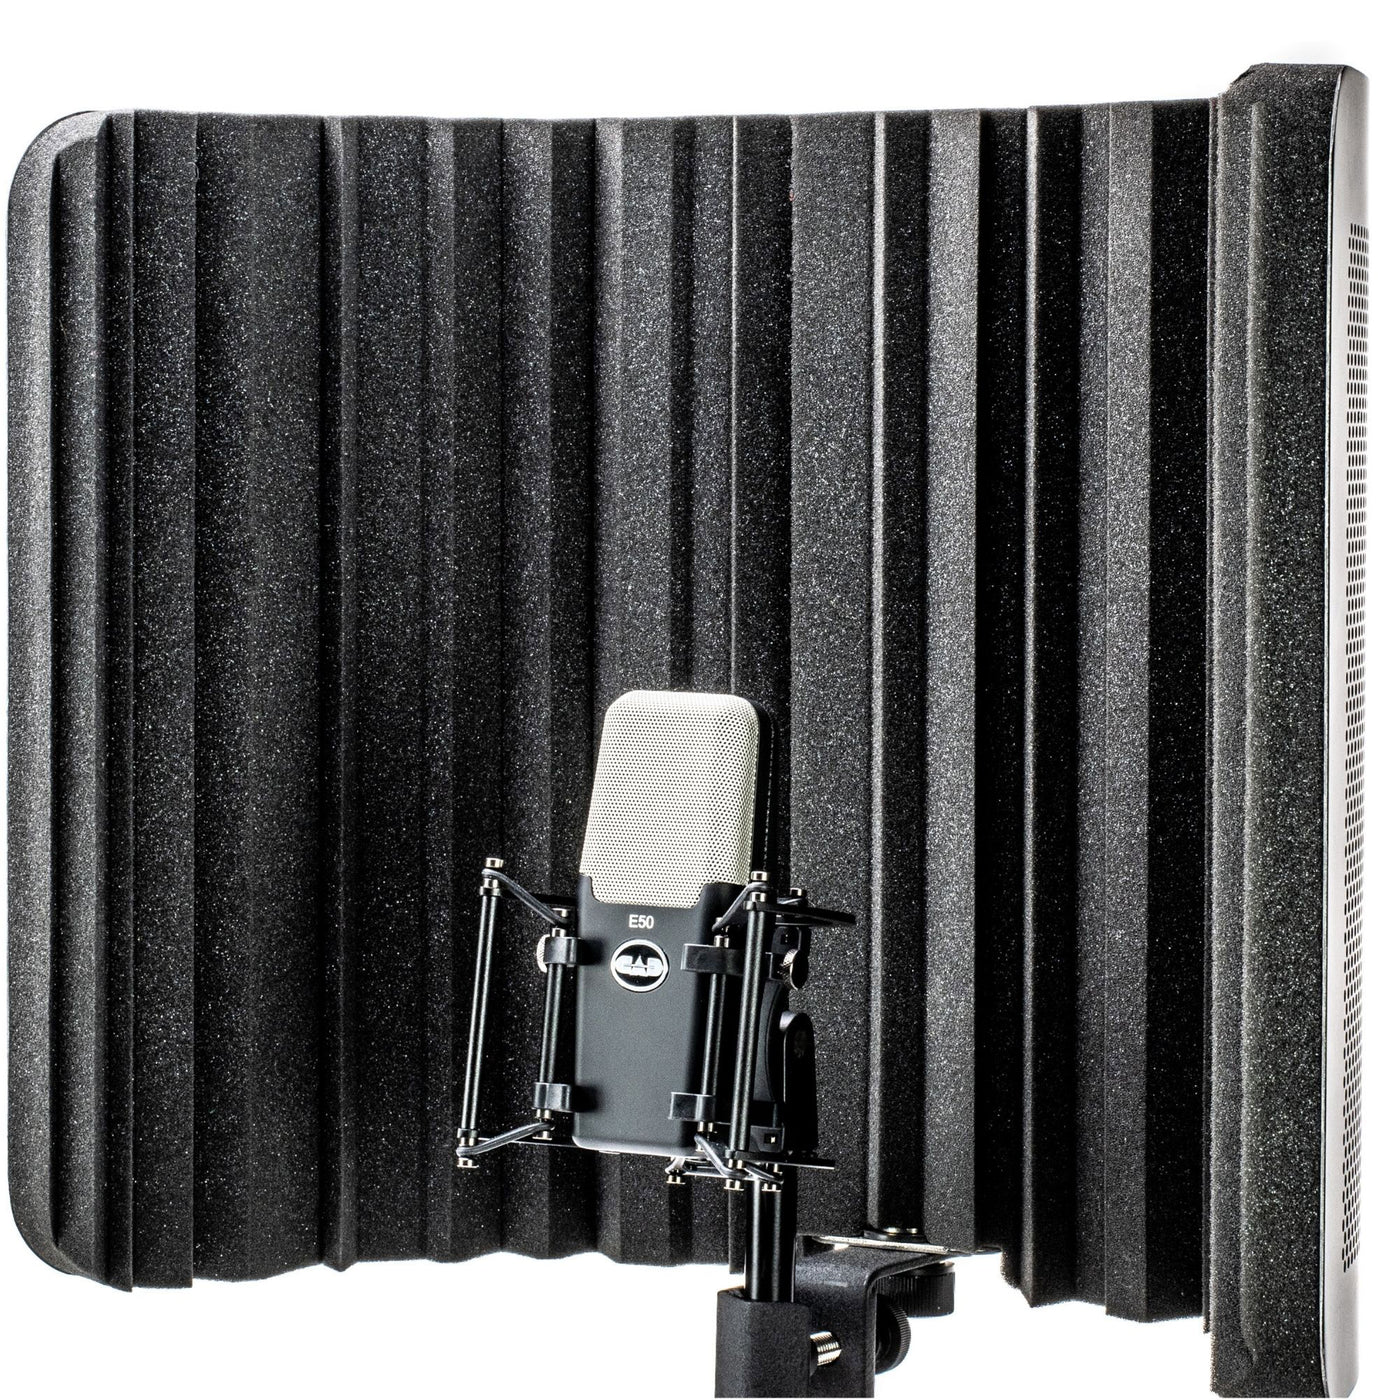 CAD Audio Acousti-Shield AS34 Stand Mounted Acoustic Enclosure (AS34)